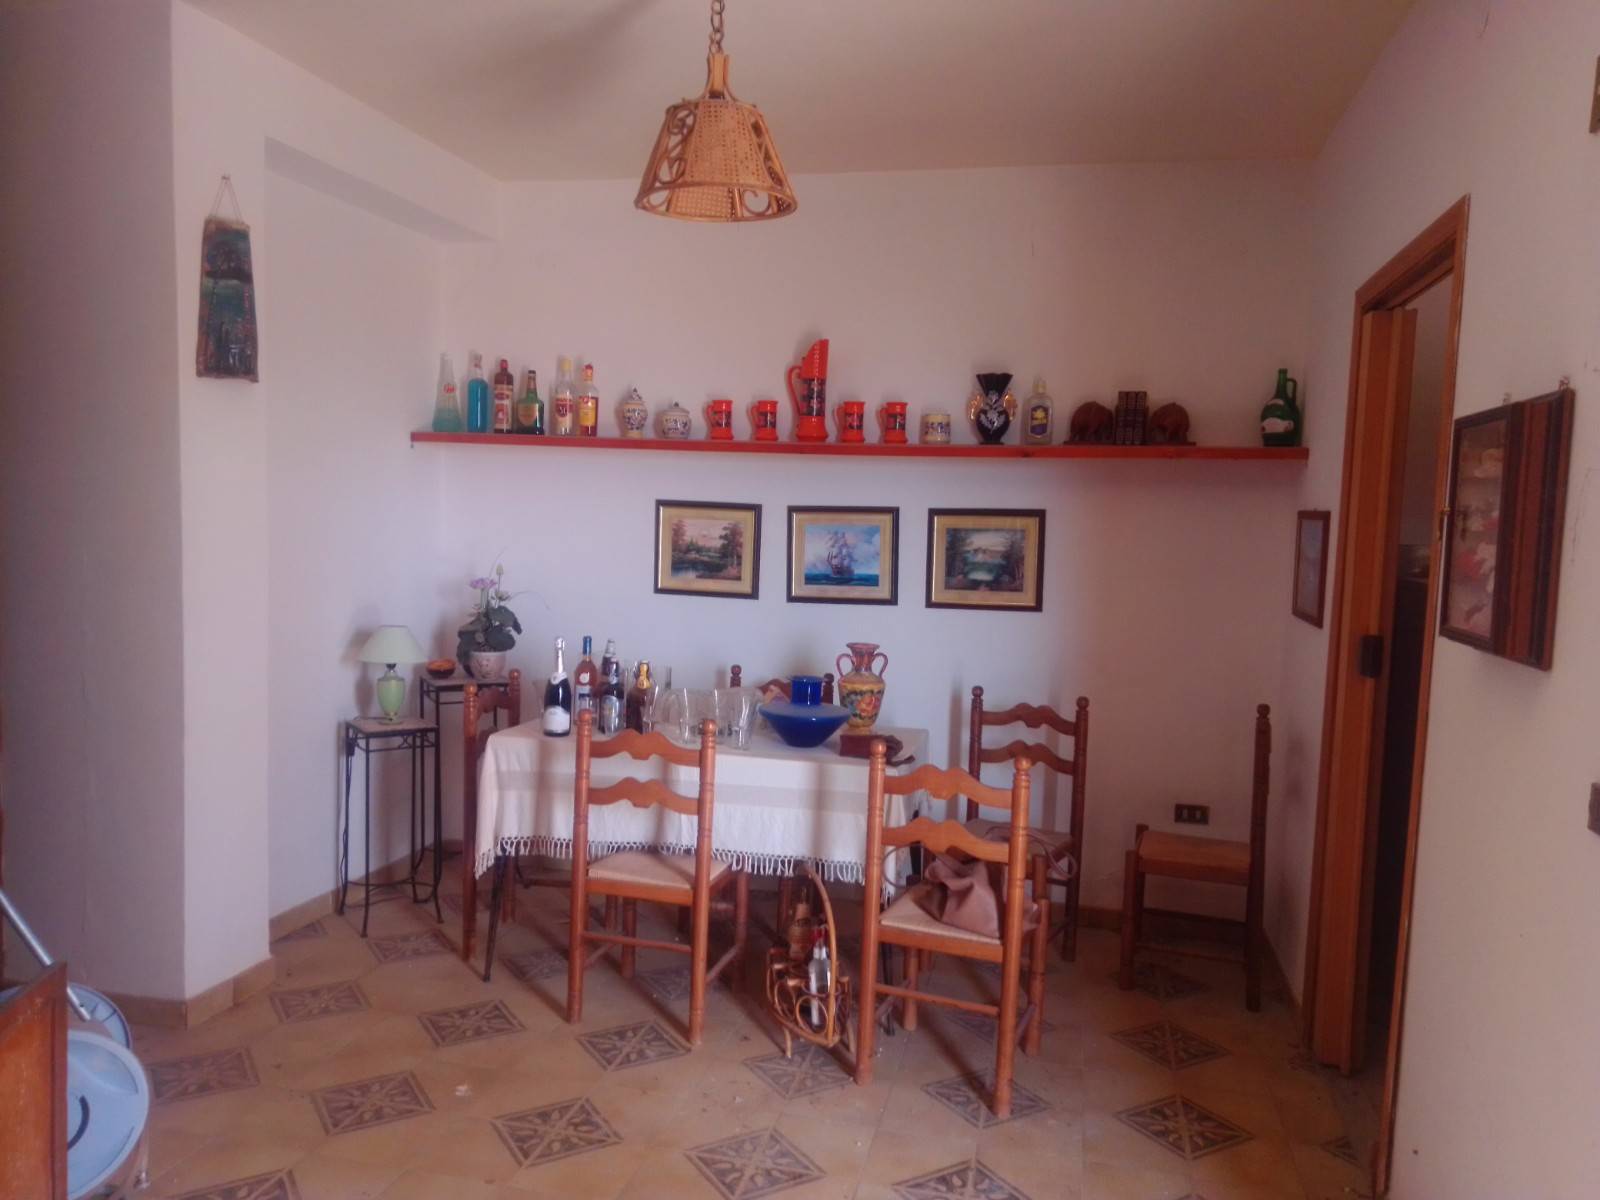 SANT'OLIVA, LICATA, Small villa for sale, Habitable, Energetic class: G, composed by: 5 Rooms, Little kitchen, , 4 Bedrooms, 2 Bathrooms, Price: € 98,